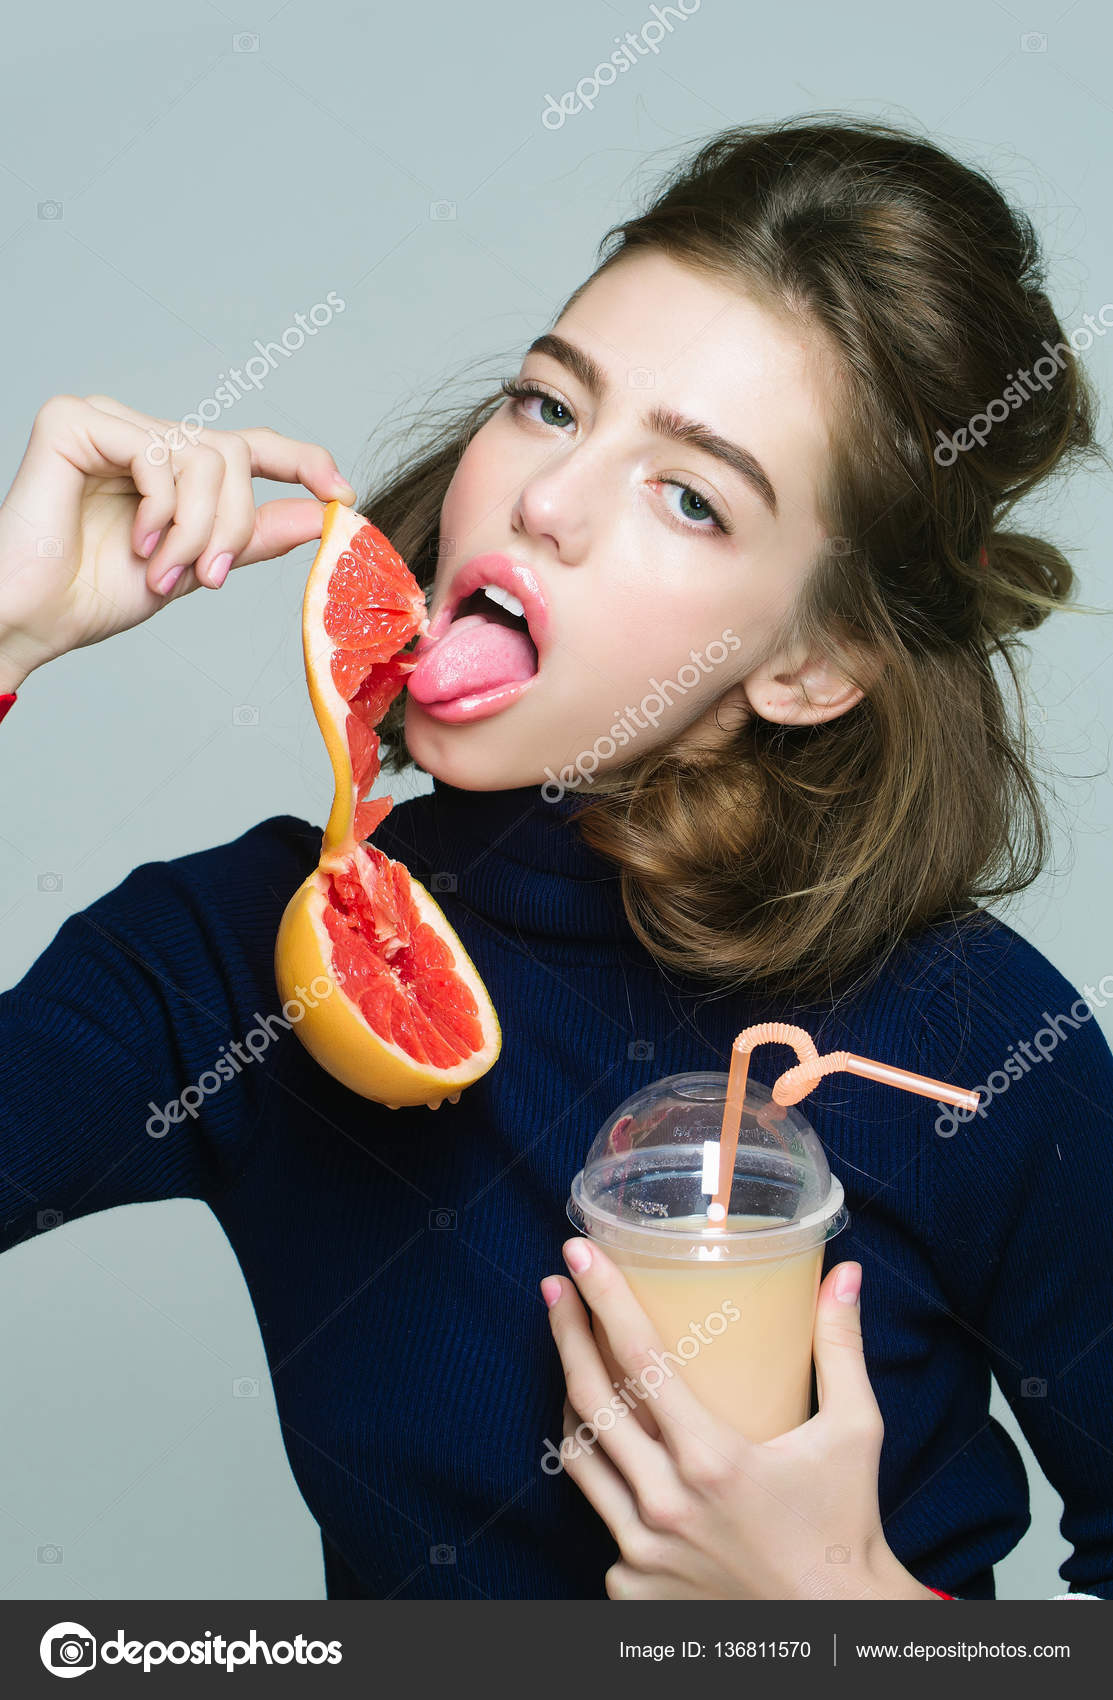 Sexy Poses With Food